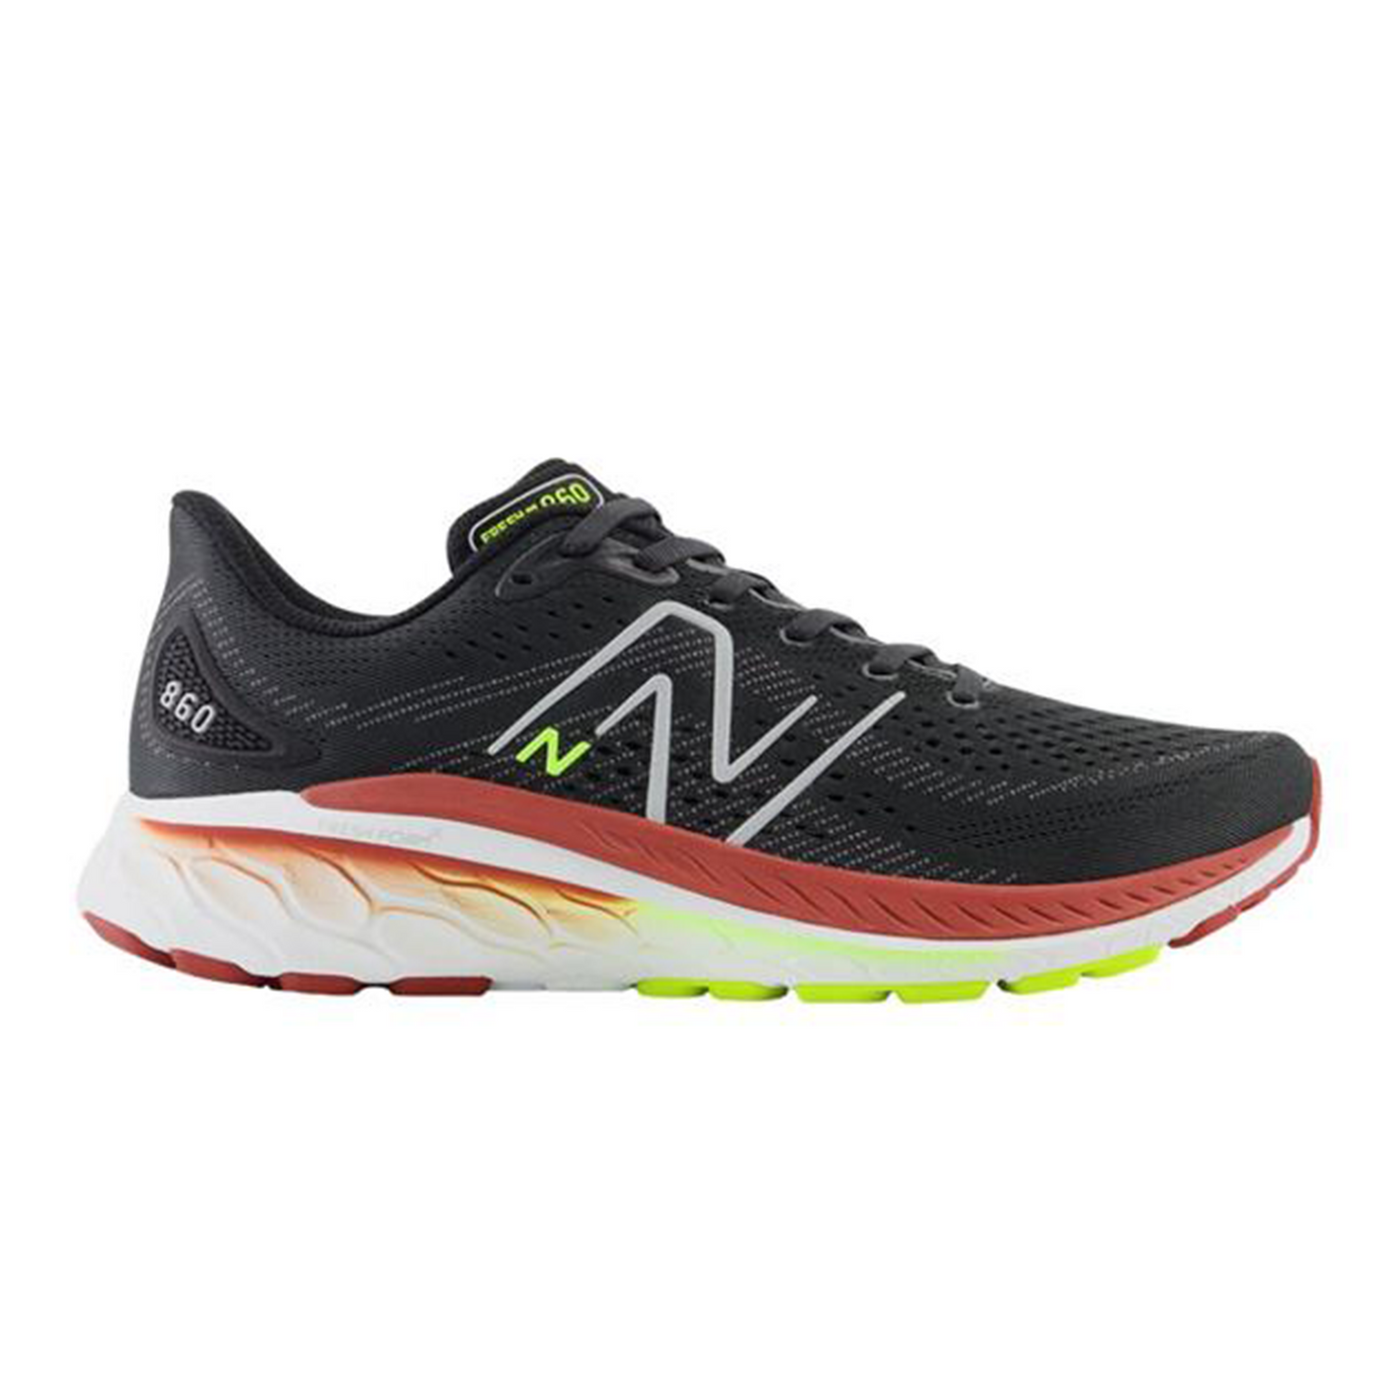 New Balance Mens 860v13 Wide - 2E Width - Black/Red Synthetic - Stability